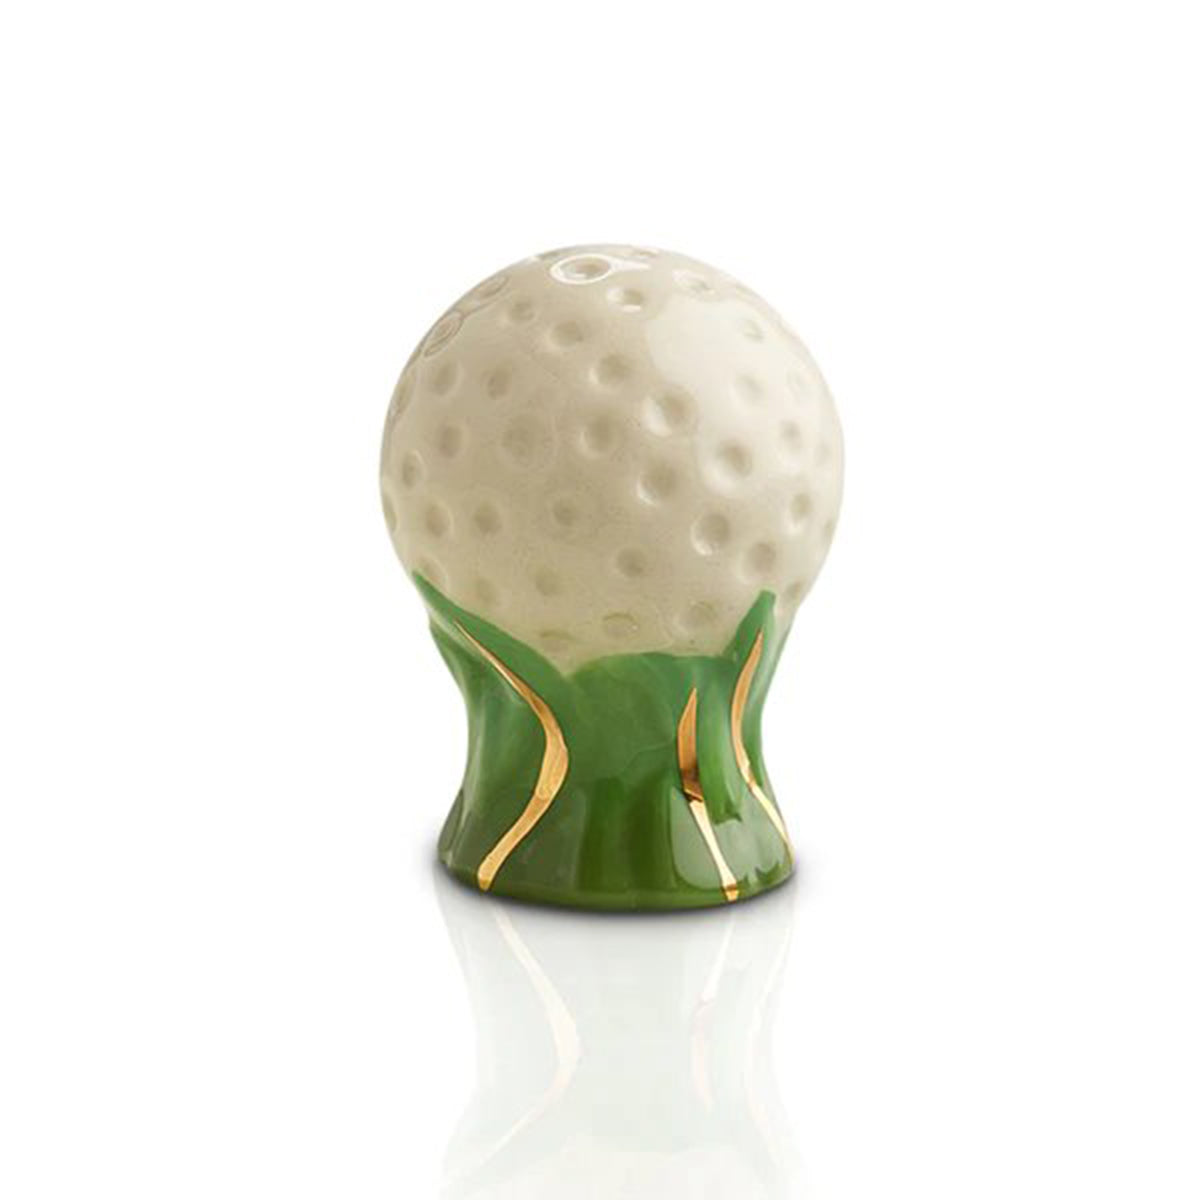 Nora Fleming "Hole in One" Golf Ball Mini